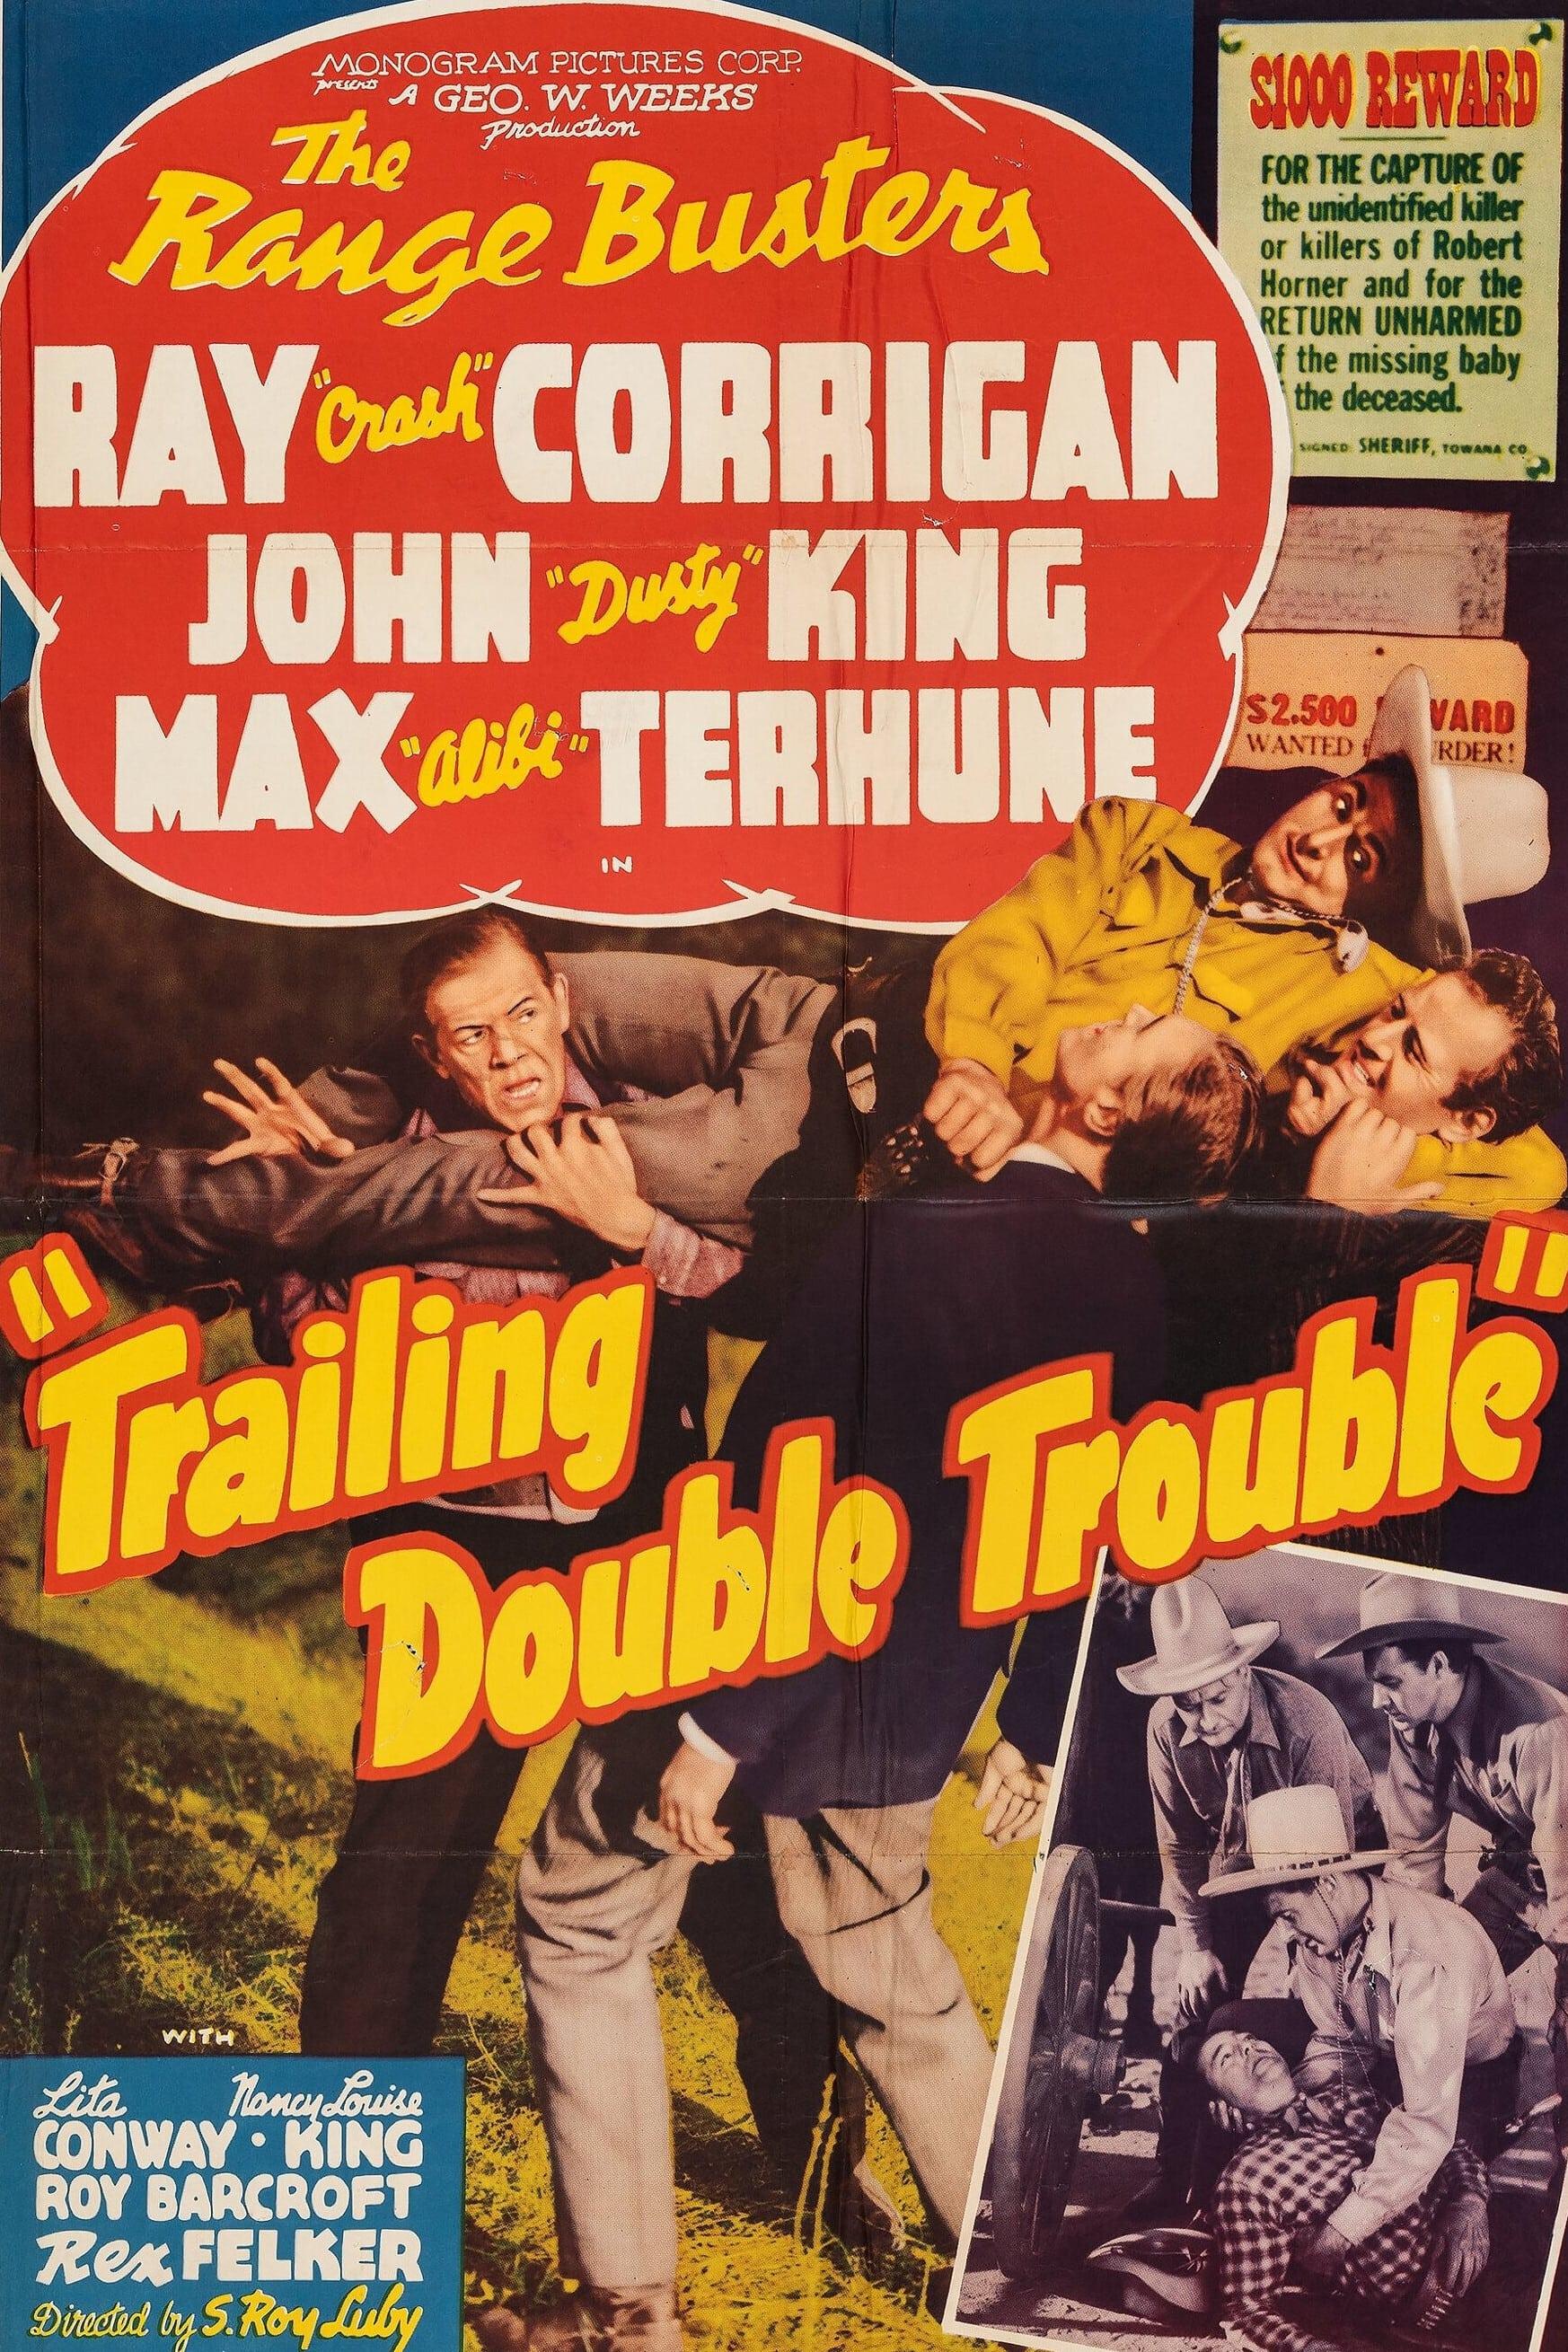 Trailing Double Trouble poster